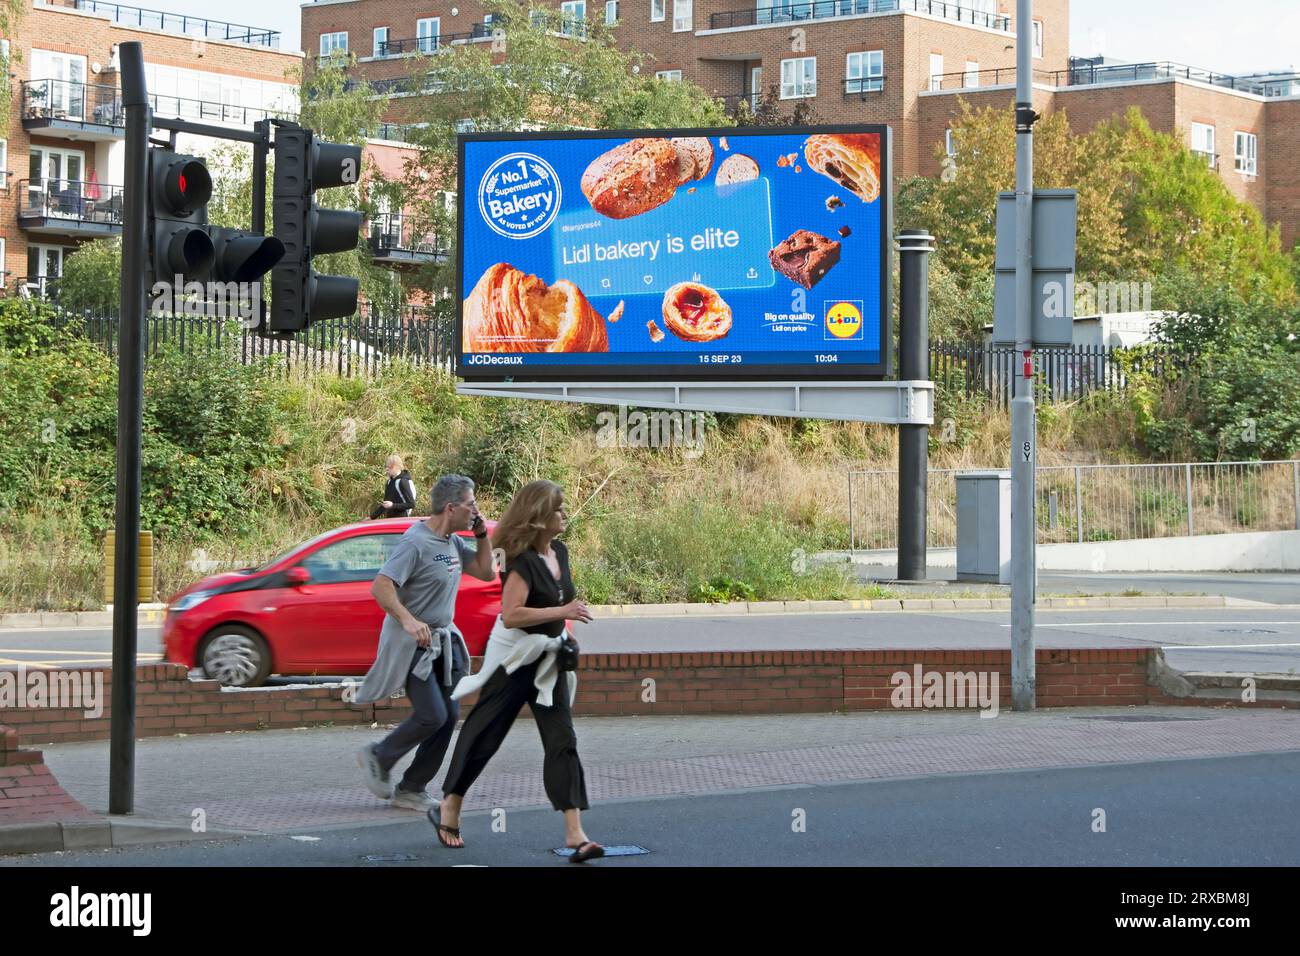 pedestrians cross the road in front of a digital billboard advertising the bakery of supermarket chain lidl with the phrase lidl bakery is elite Stock Photo